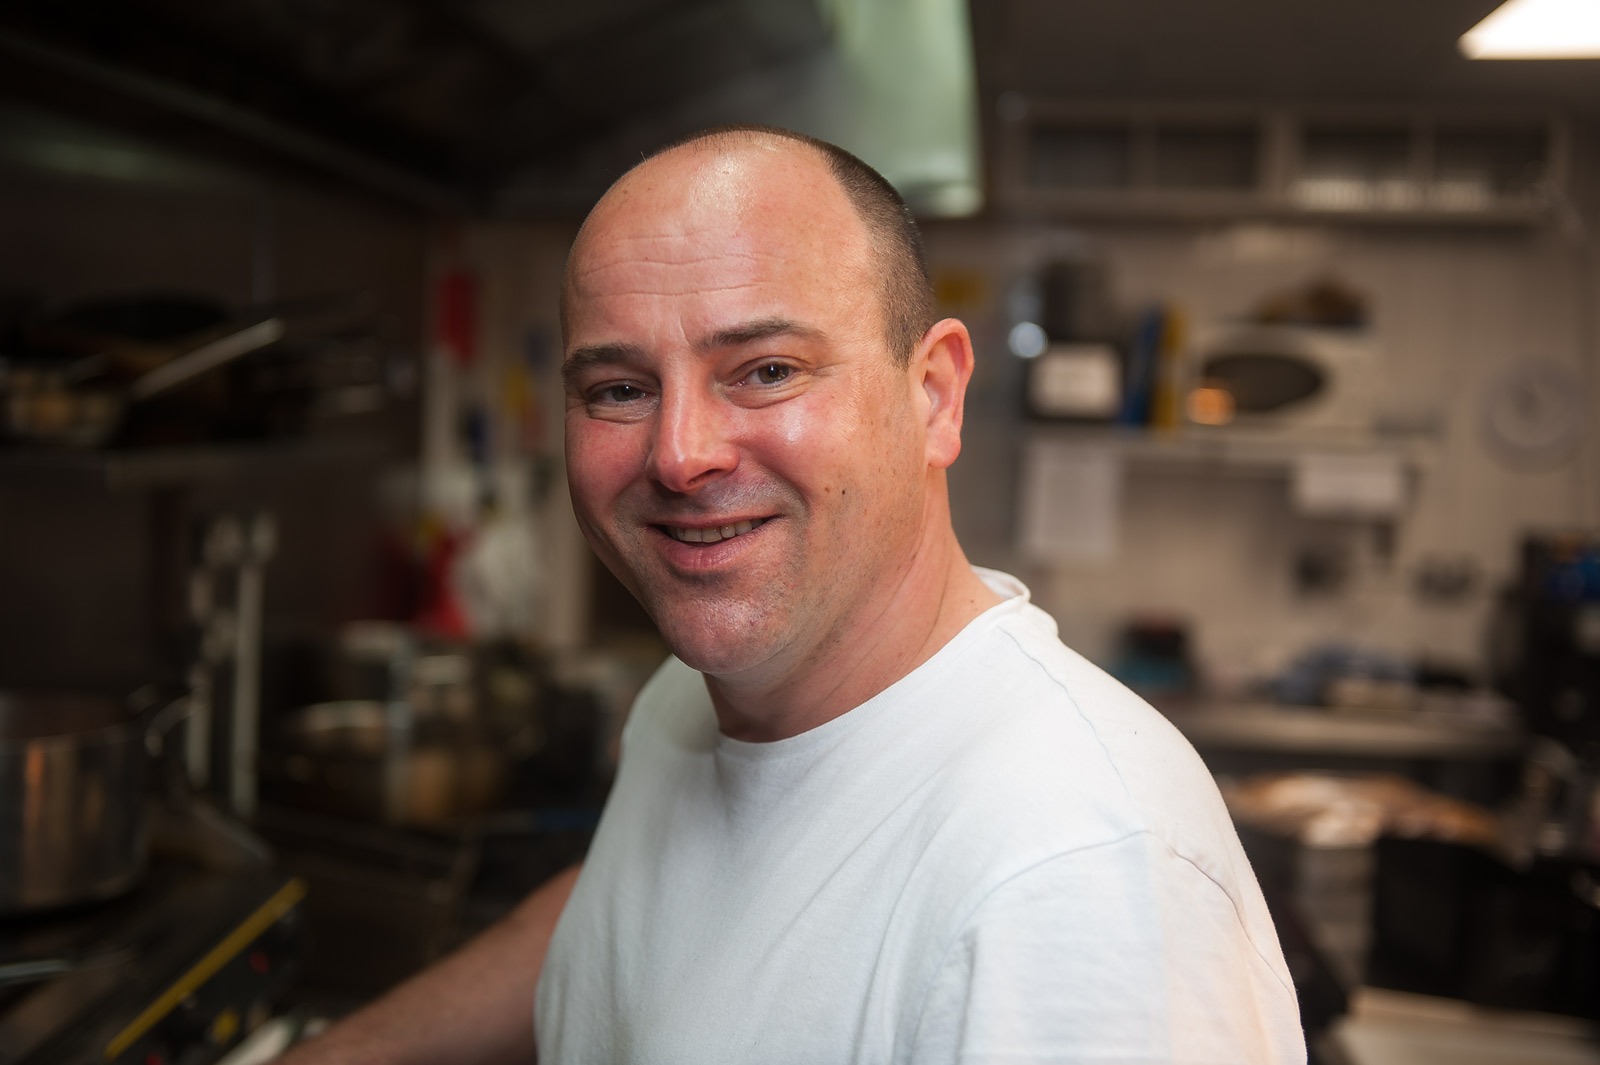 Clive Leyland returns to Harrogate to be NJ's chef